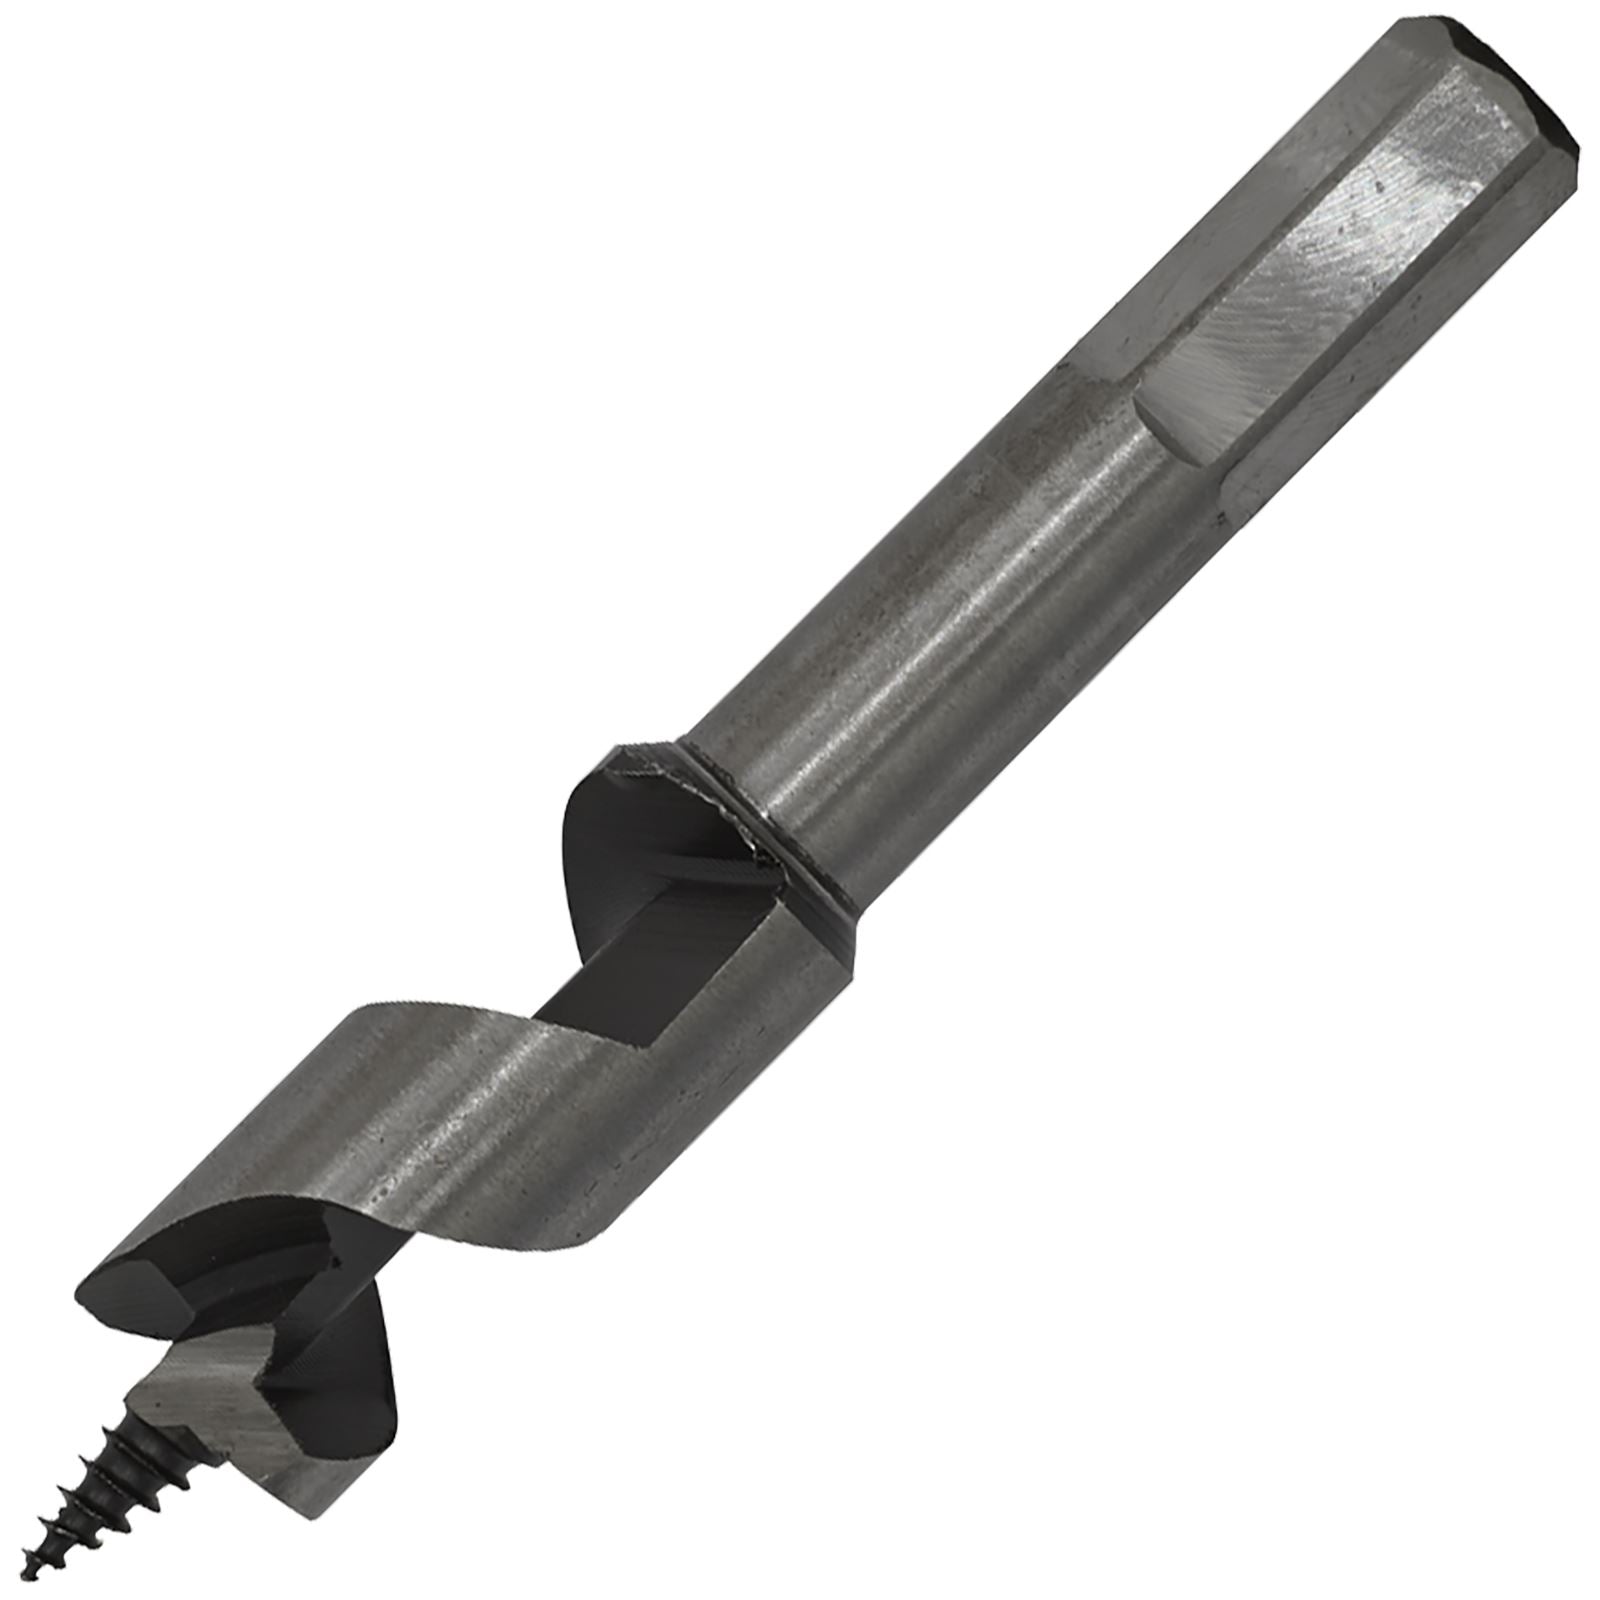 Worksafe by Sealey Auger Wood Drill Bit 16mm x 100mm